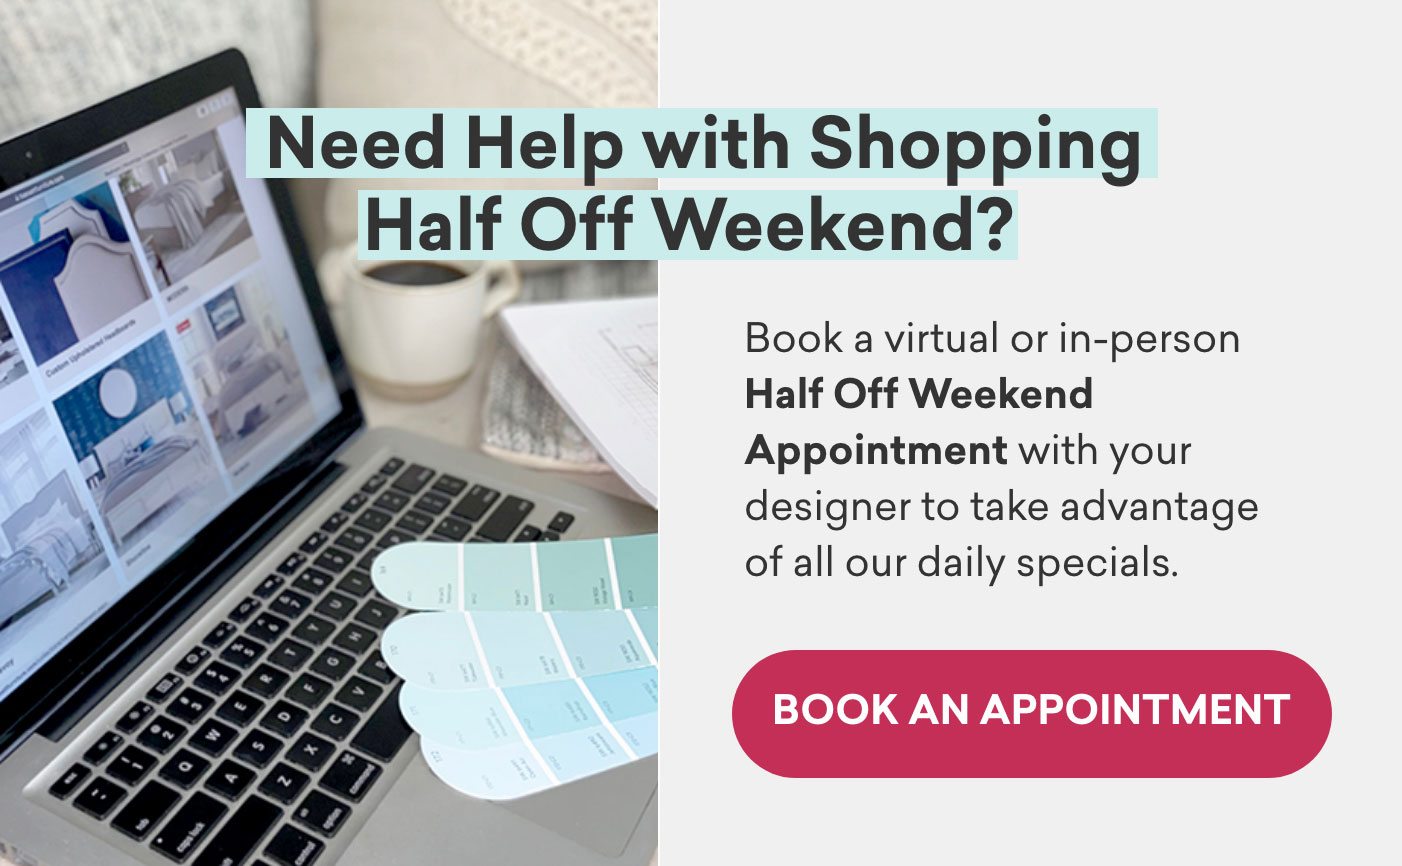 Need help shopping the half off weekend? Book a virtual or in-person appointment.